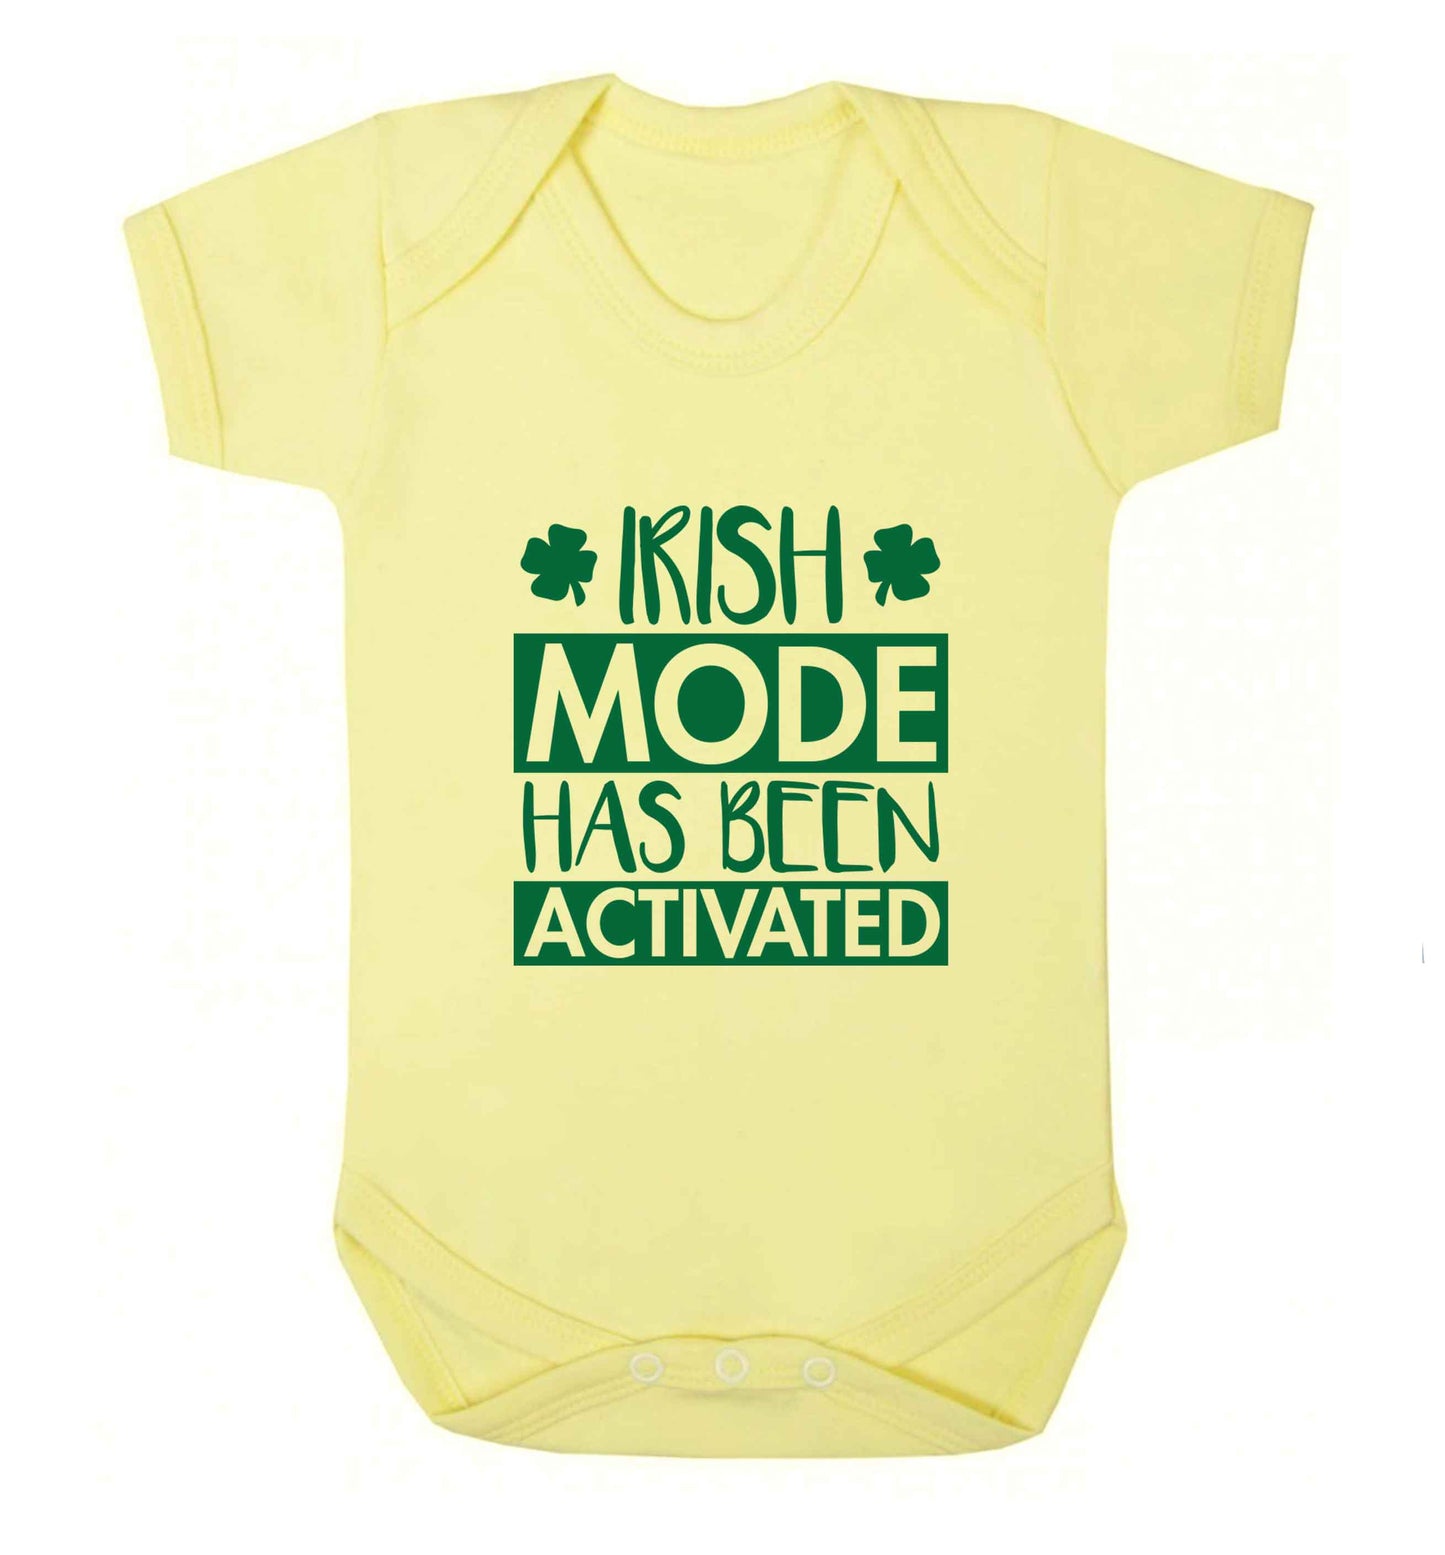 Irish mode has been activated baby vest pale yellow 18-24 months